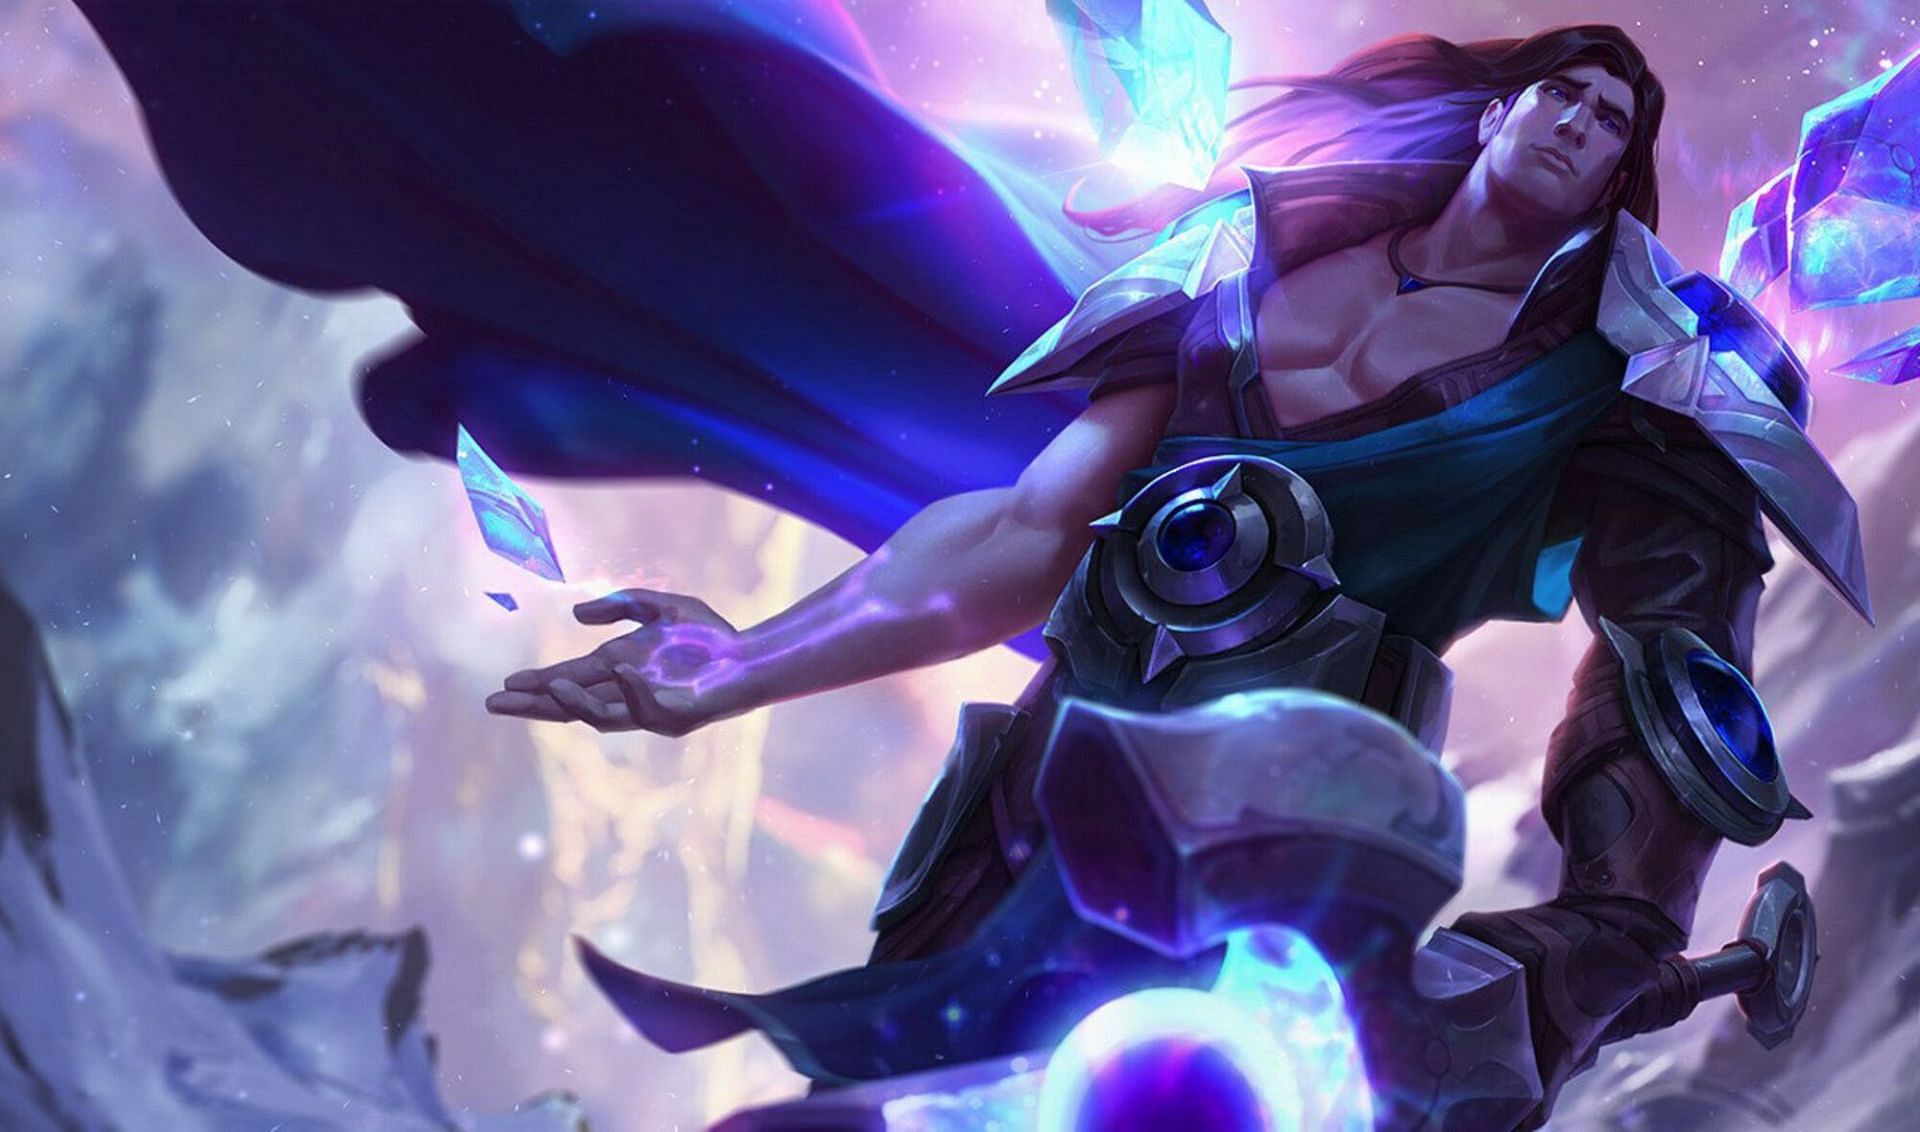 Taric, The Shield of Valoran (Image via Riot Games - League of Legends)